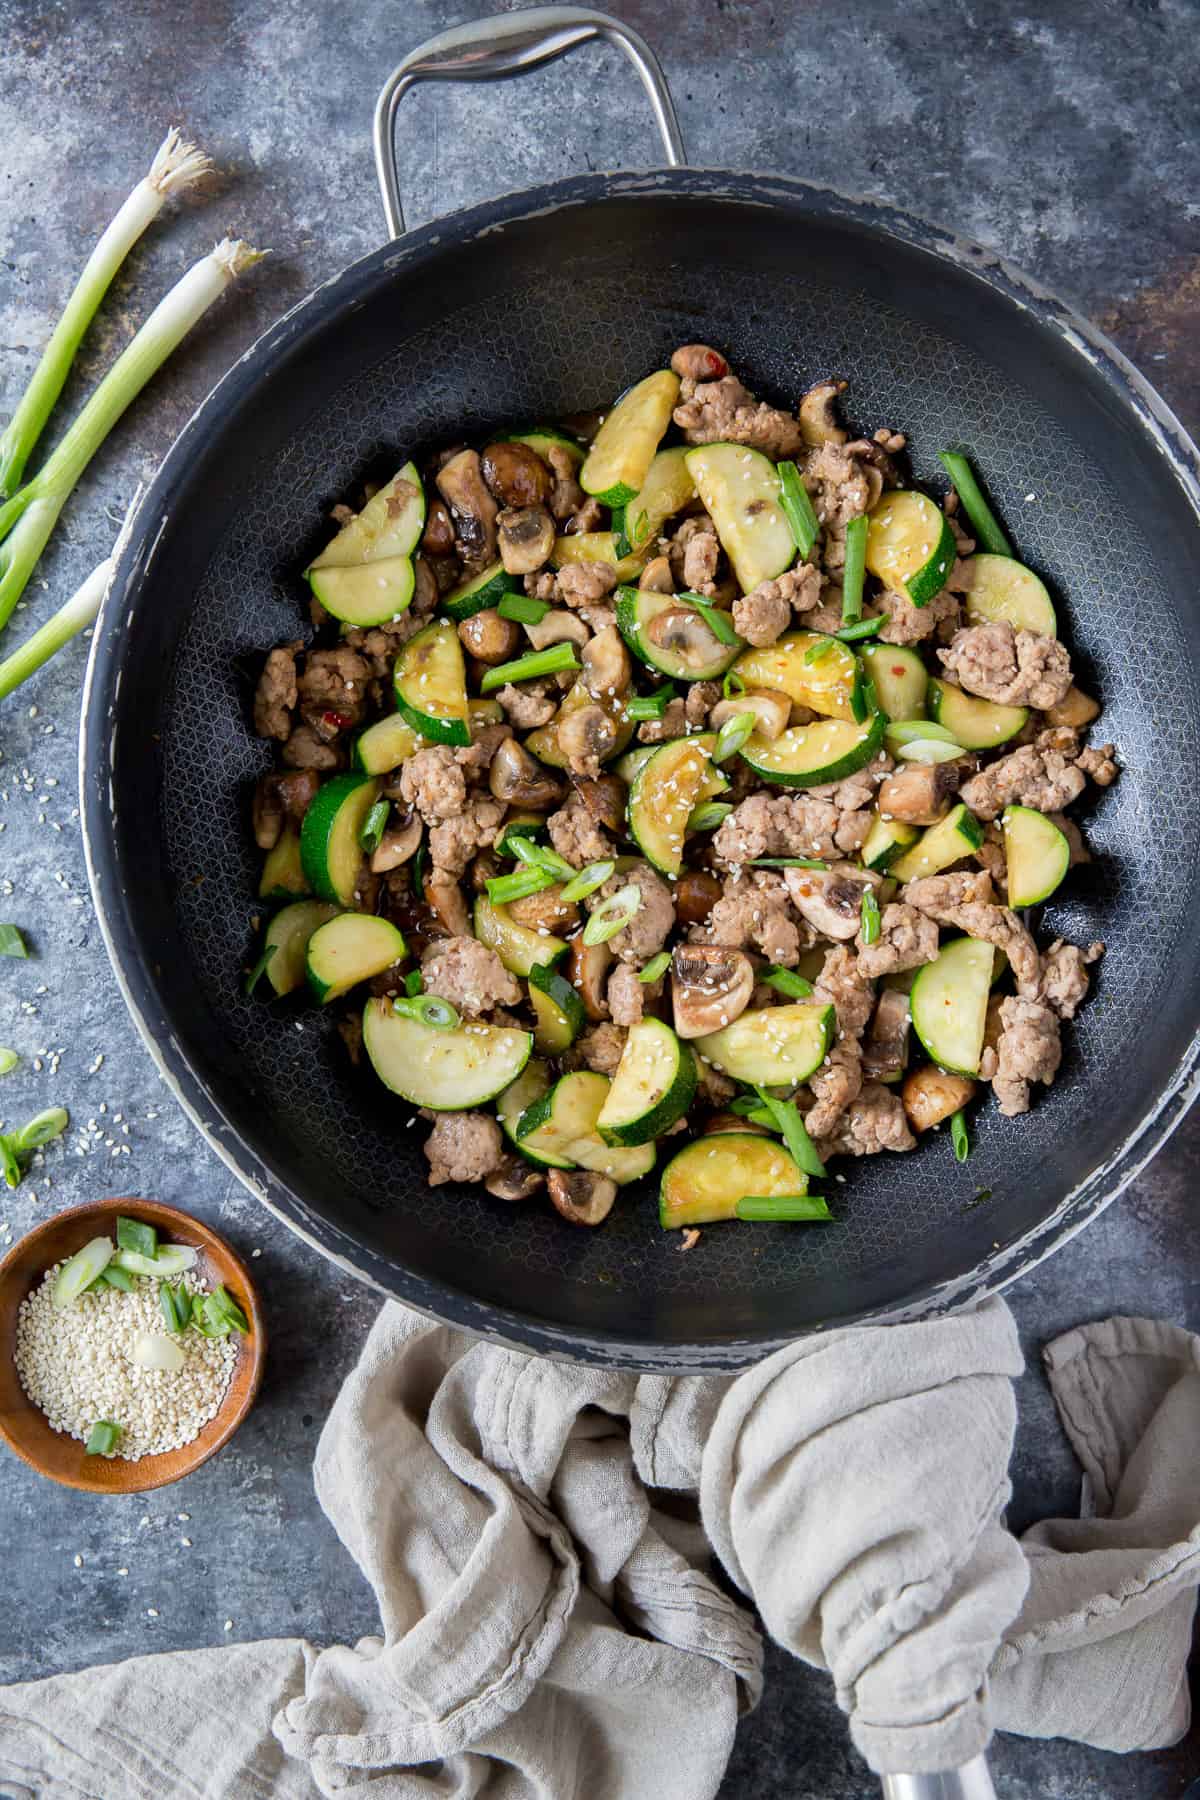 The ground pork stir fry in a large skillet shot from over the top.